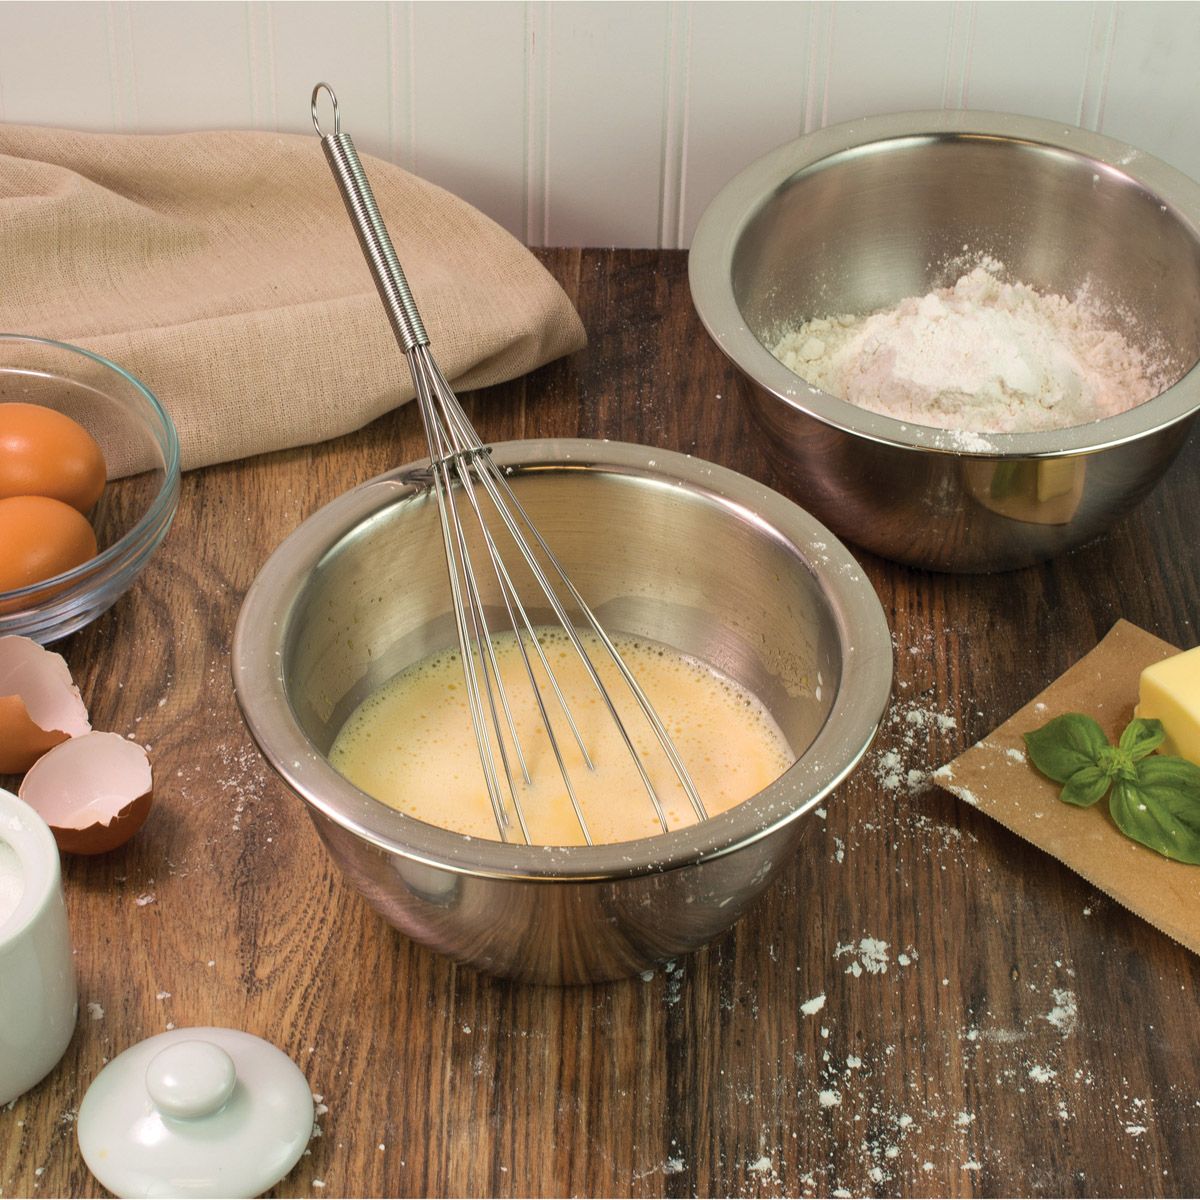 Mrs. Anderson's 12-Inch Stainless Steel Whisk